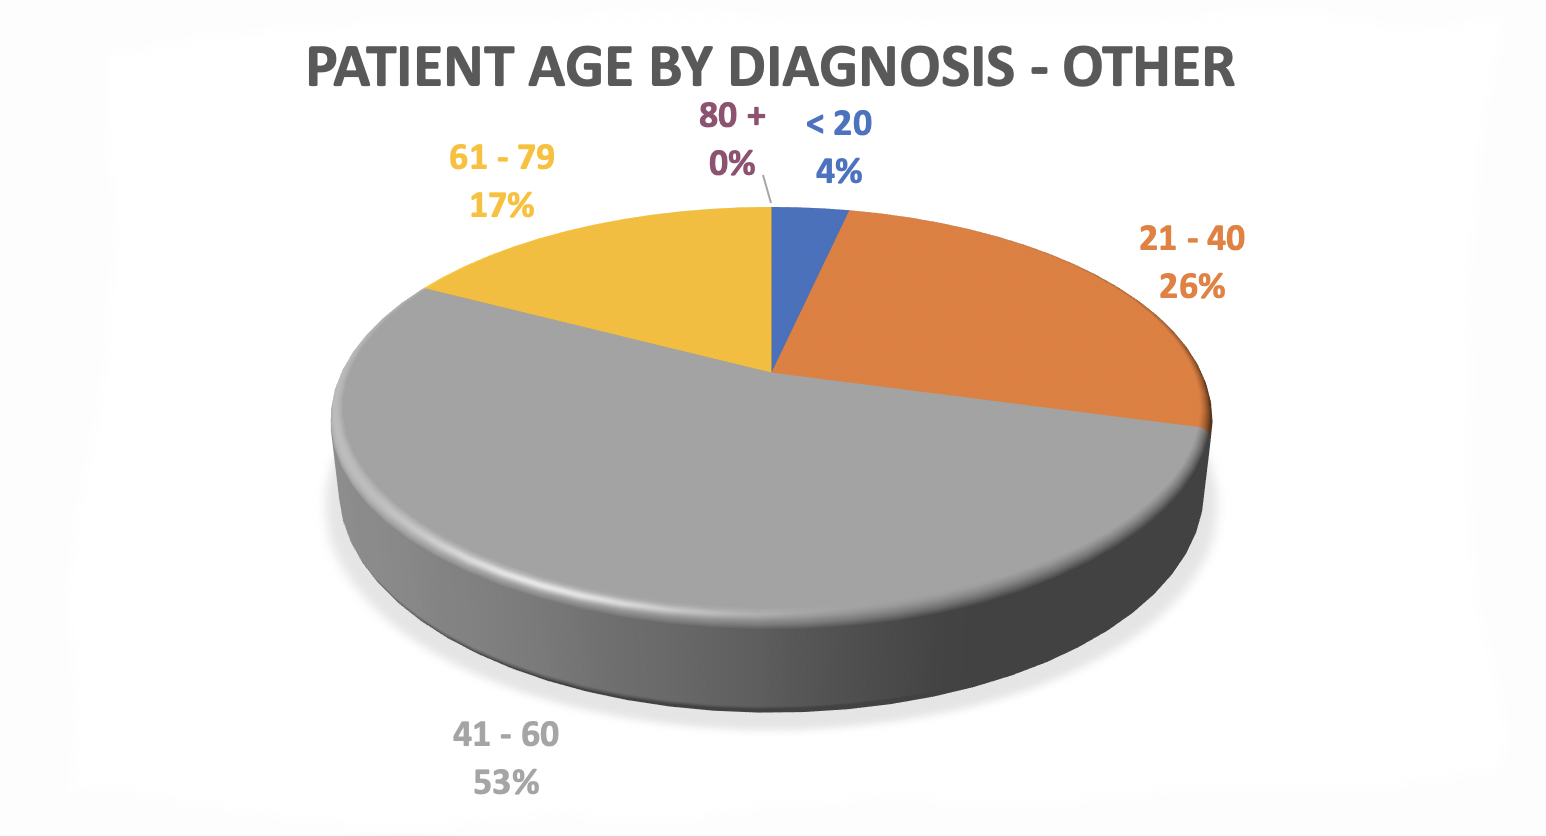 image of pie chart reveals patient age data for other ABI at Pate Rehab